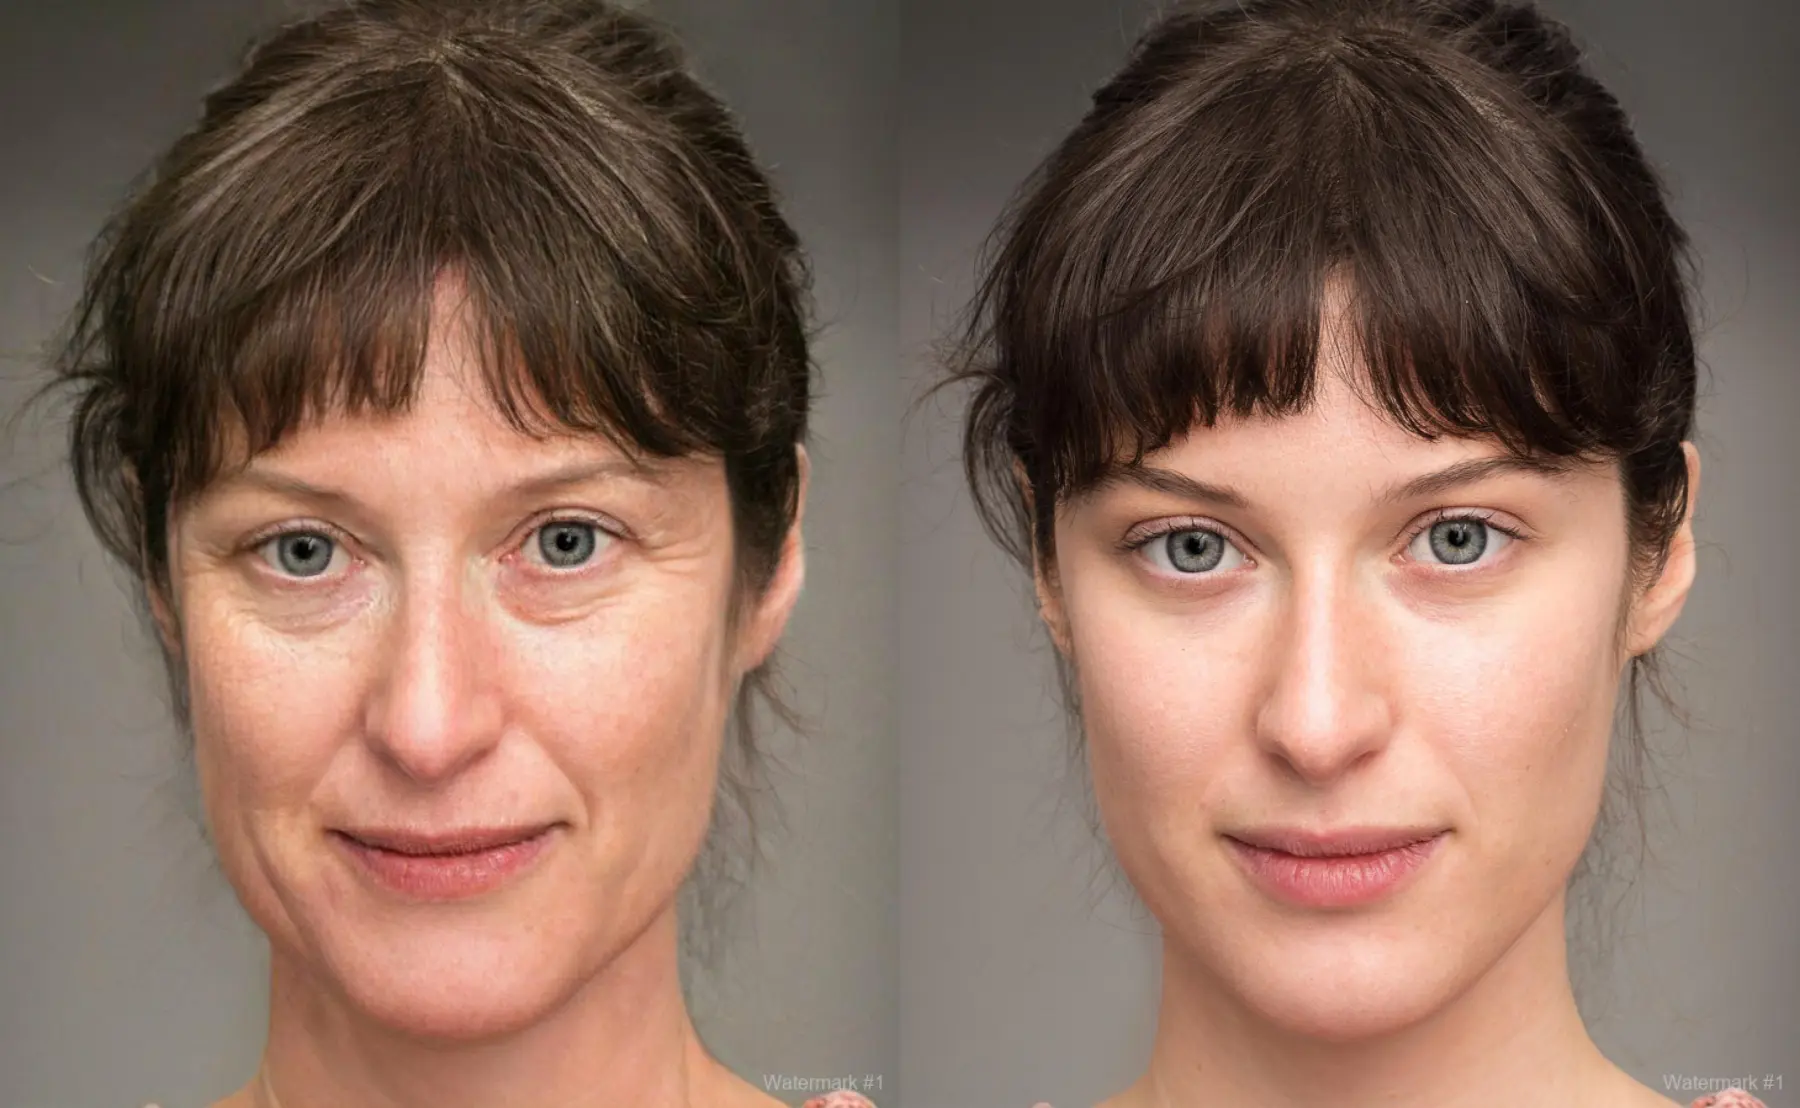 Facelift: Patient 1 - Before and After 3